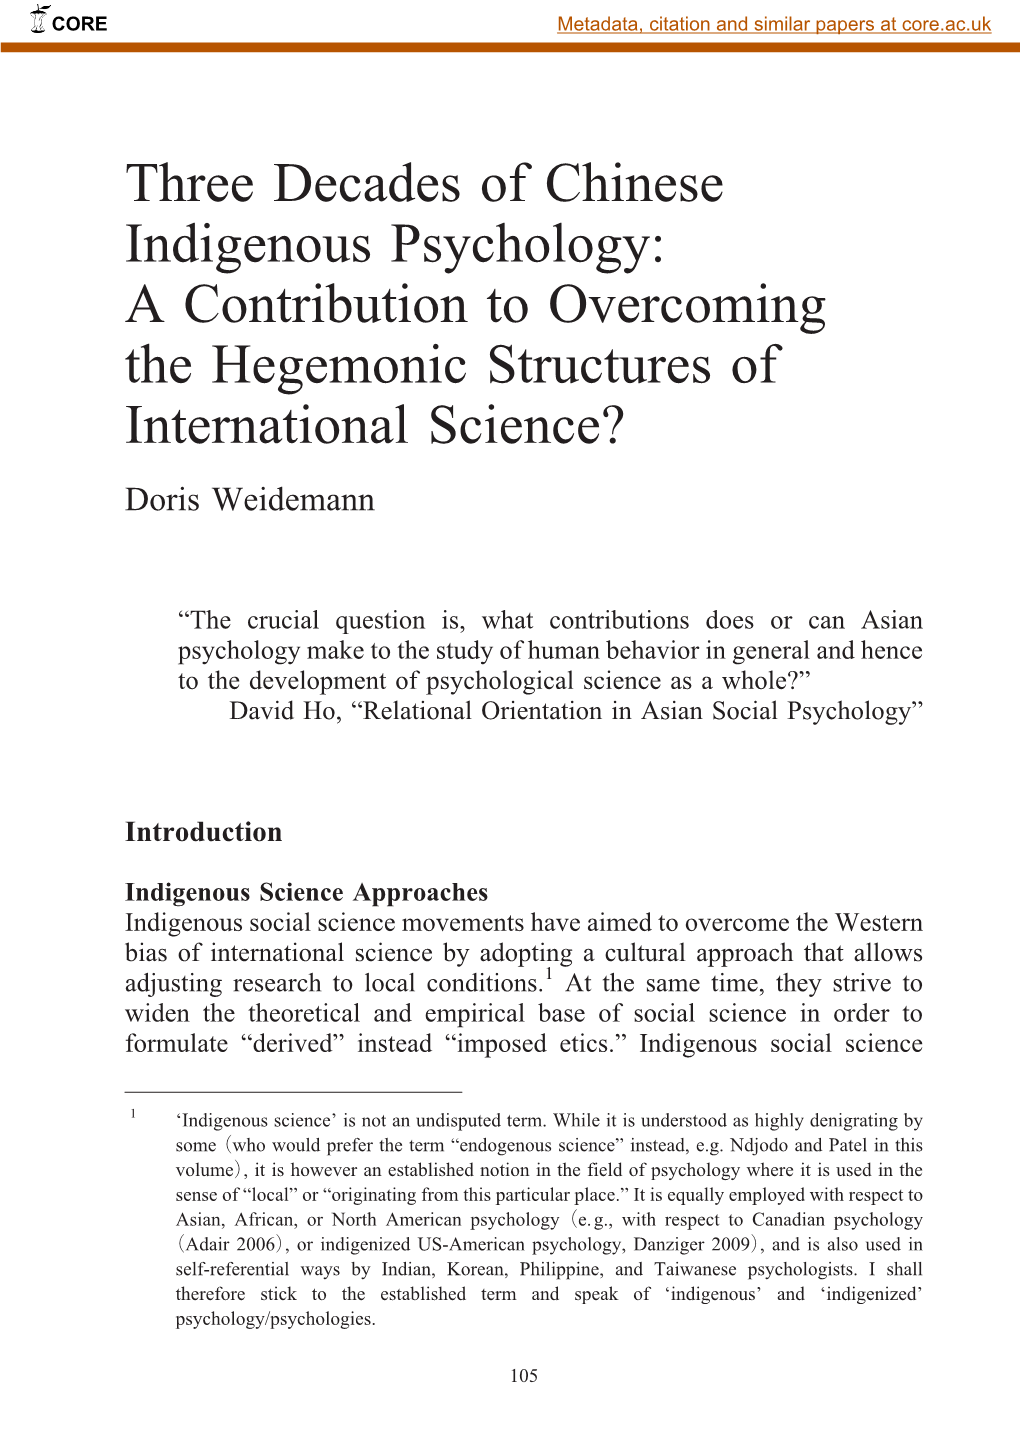 Three Decades of Chinese Indigenous Psychology